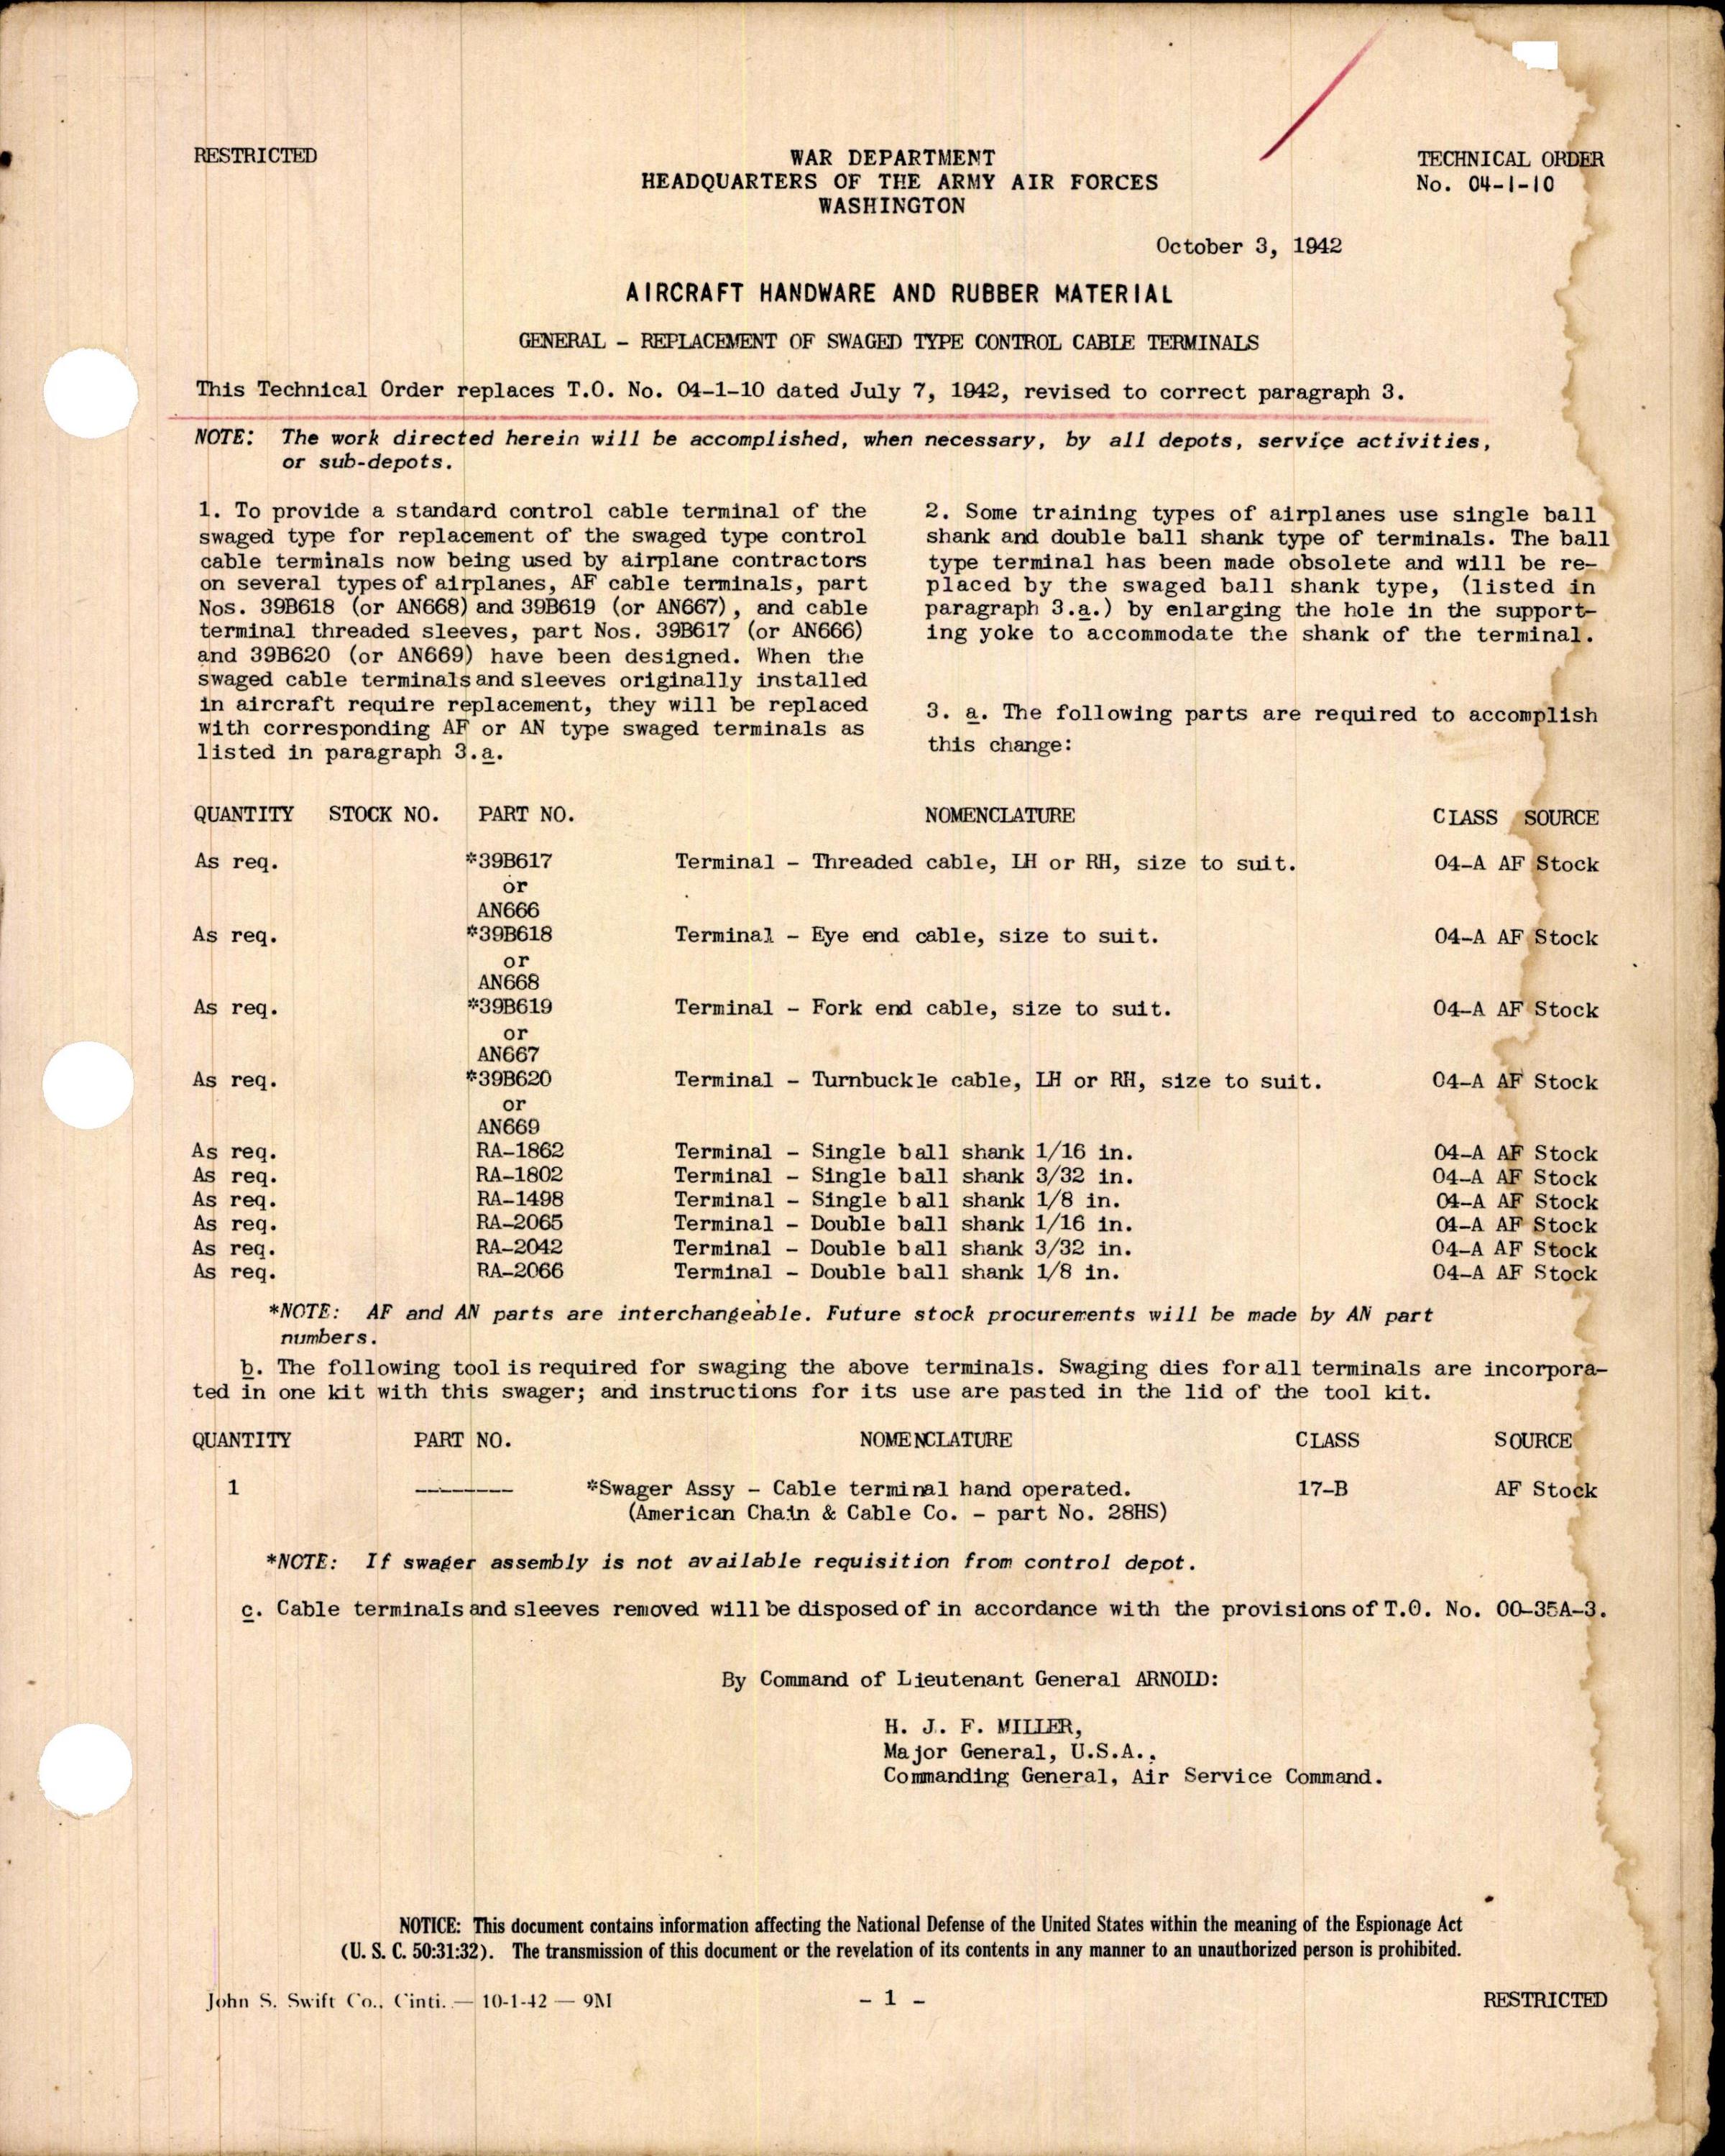 Sample page 1 from AirCorps Library document: Replacement of Swaged Type Control Cable Terminals